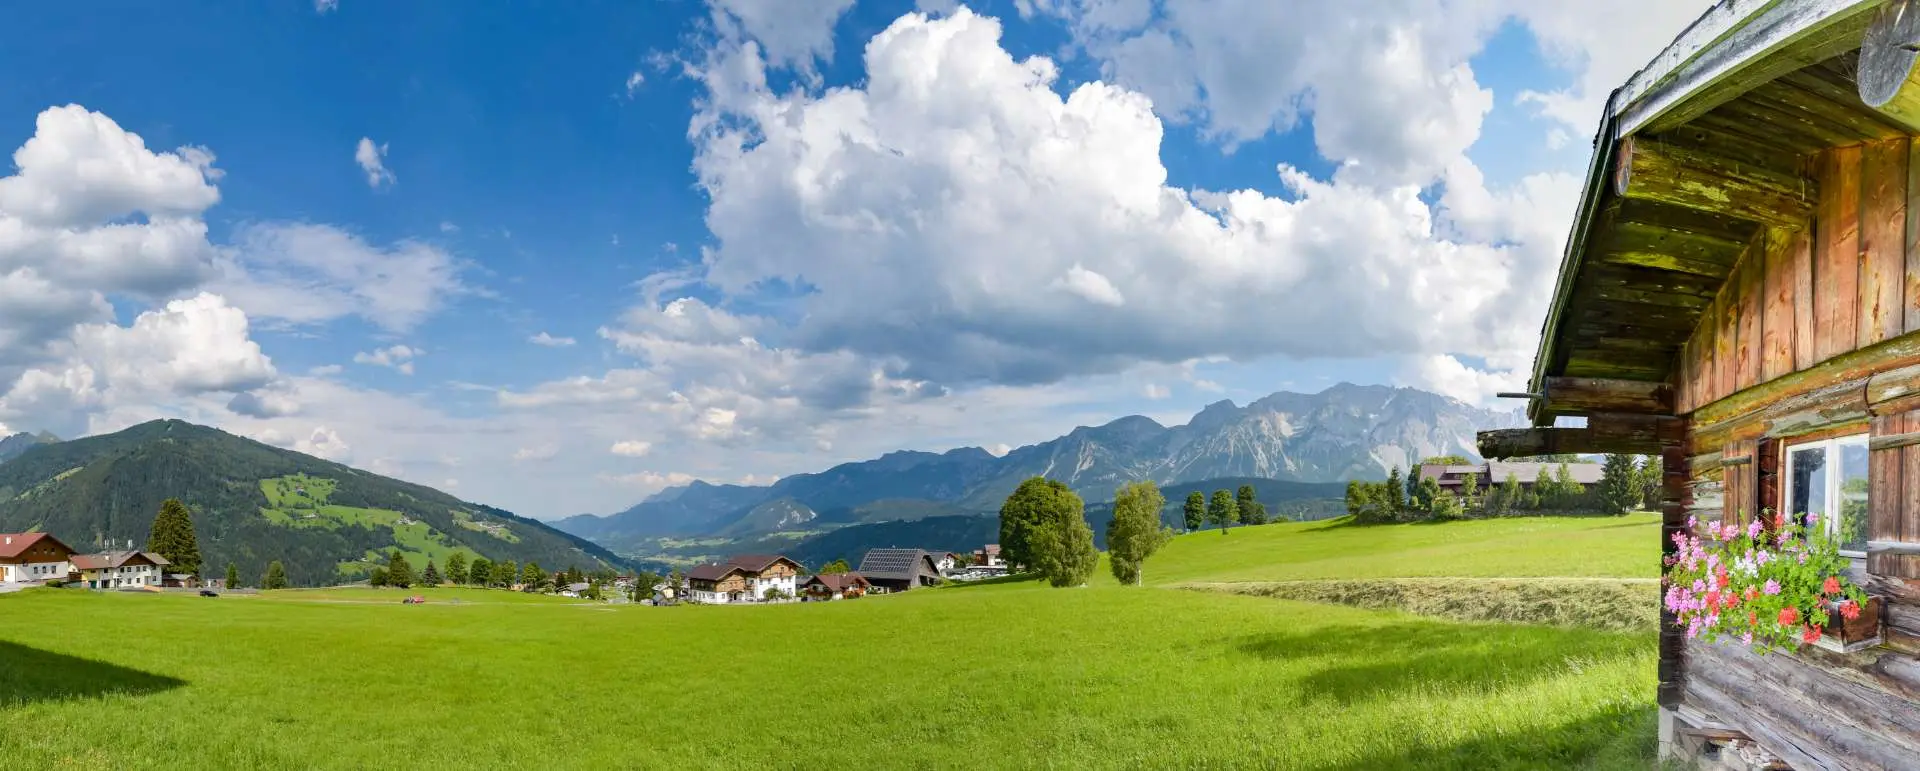 Styria - the destination for groups